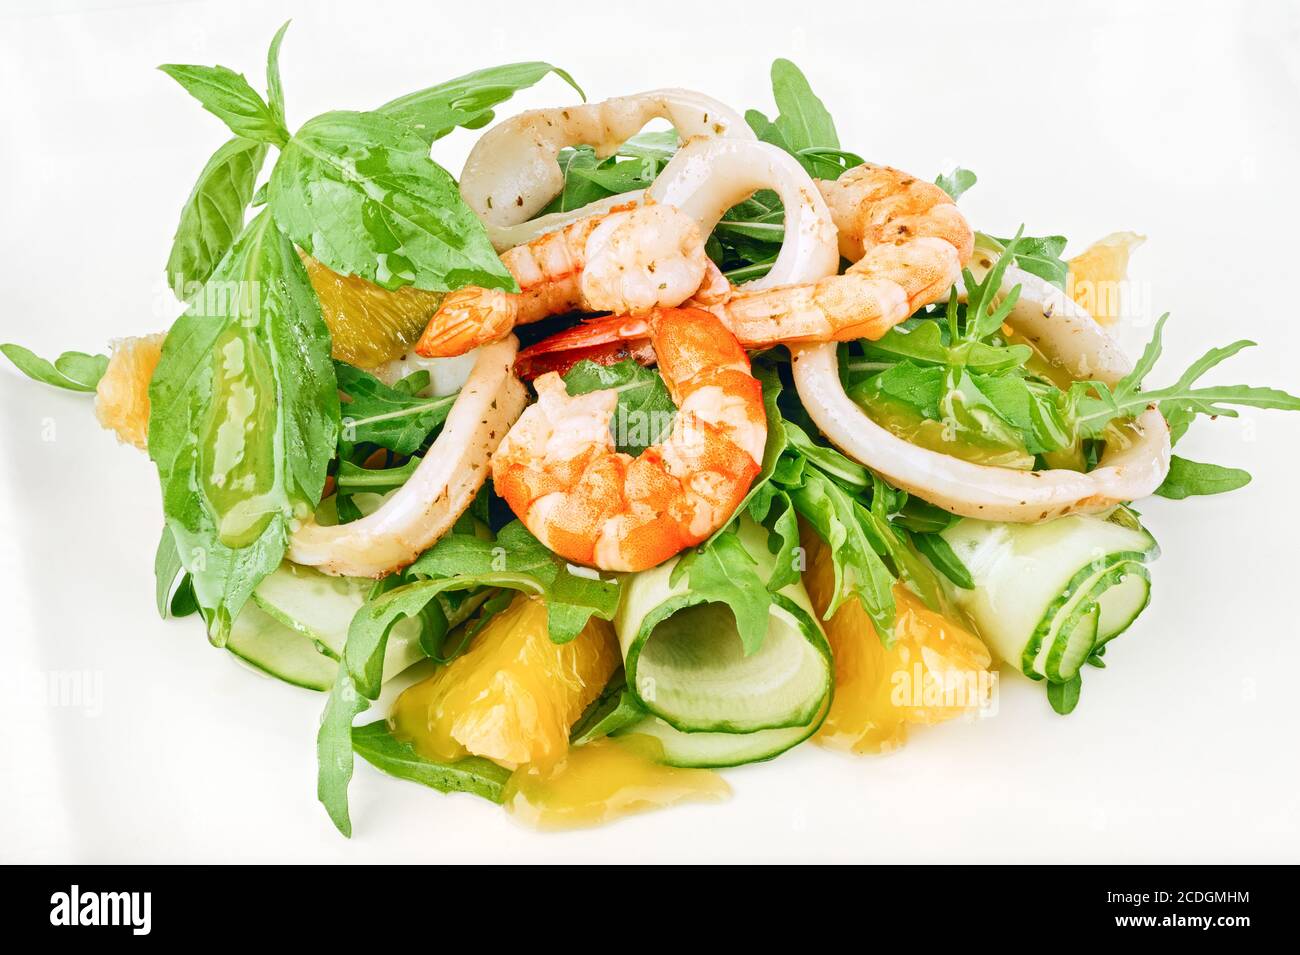 Organic seafood green salad with shrimps, squid rings, cucumber and arugula decorated with basil leaves Stock Photo